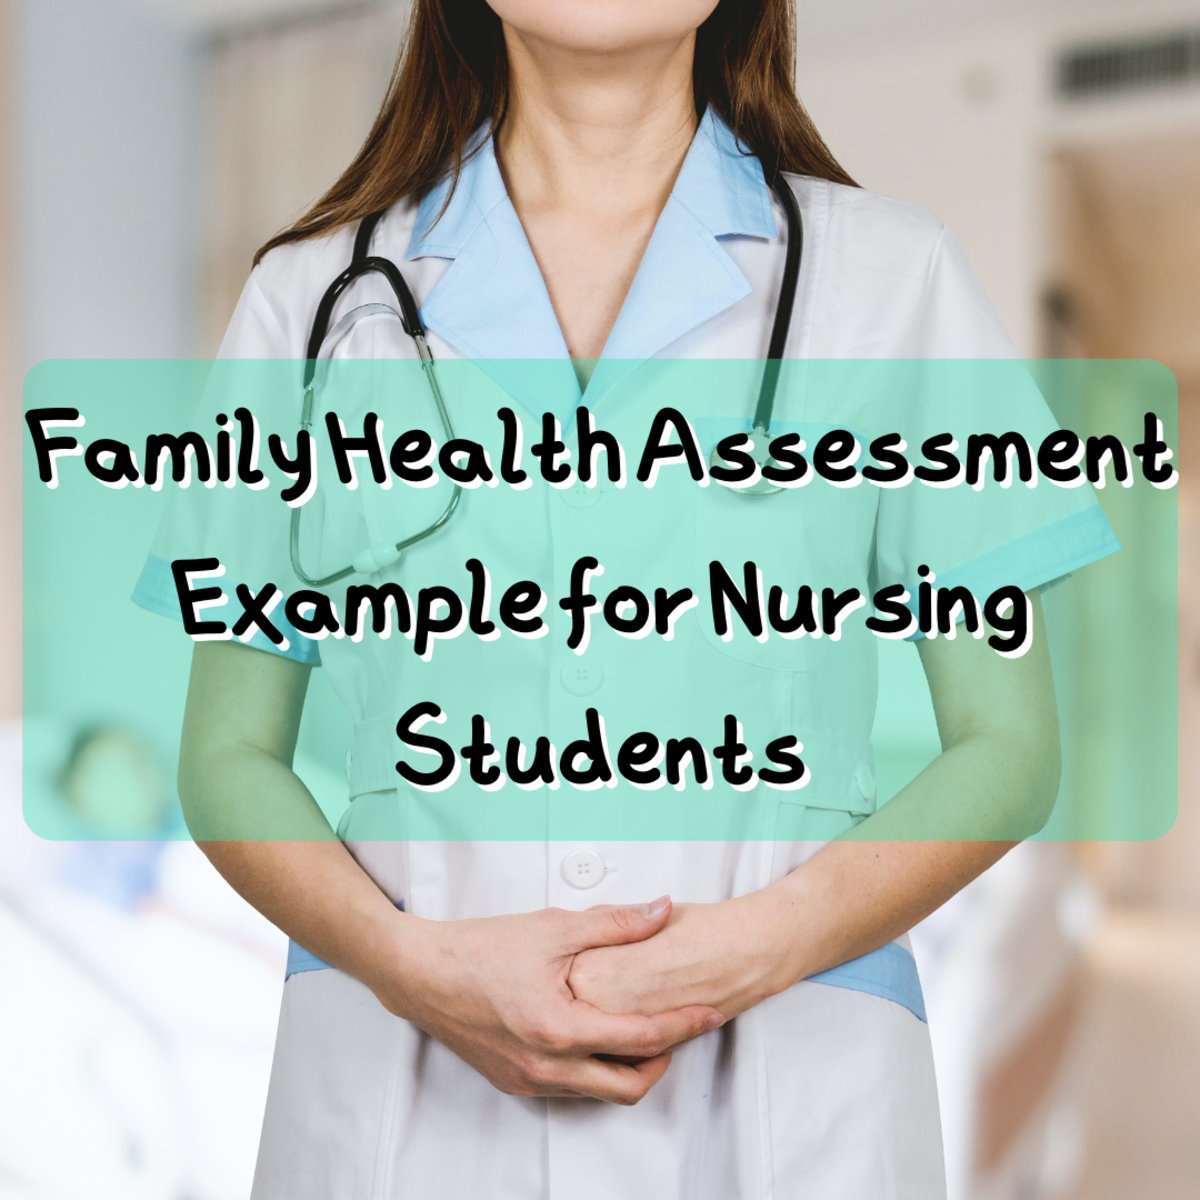 Read on to find an example family health assessment. This example will be helpful to nursing students trying to understand the process.